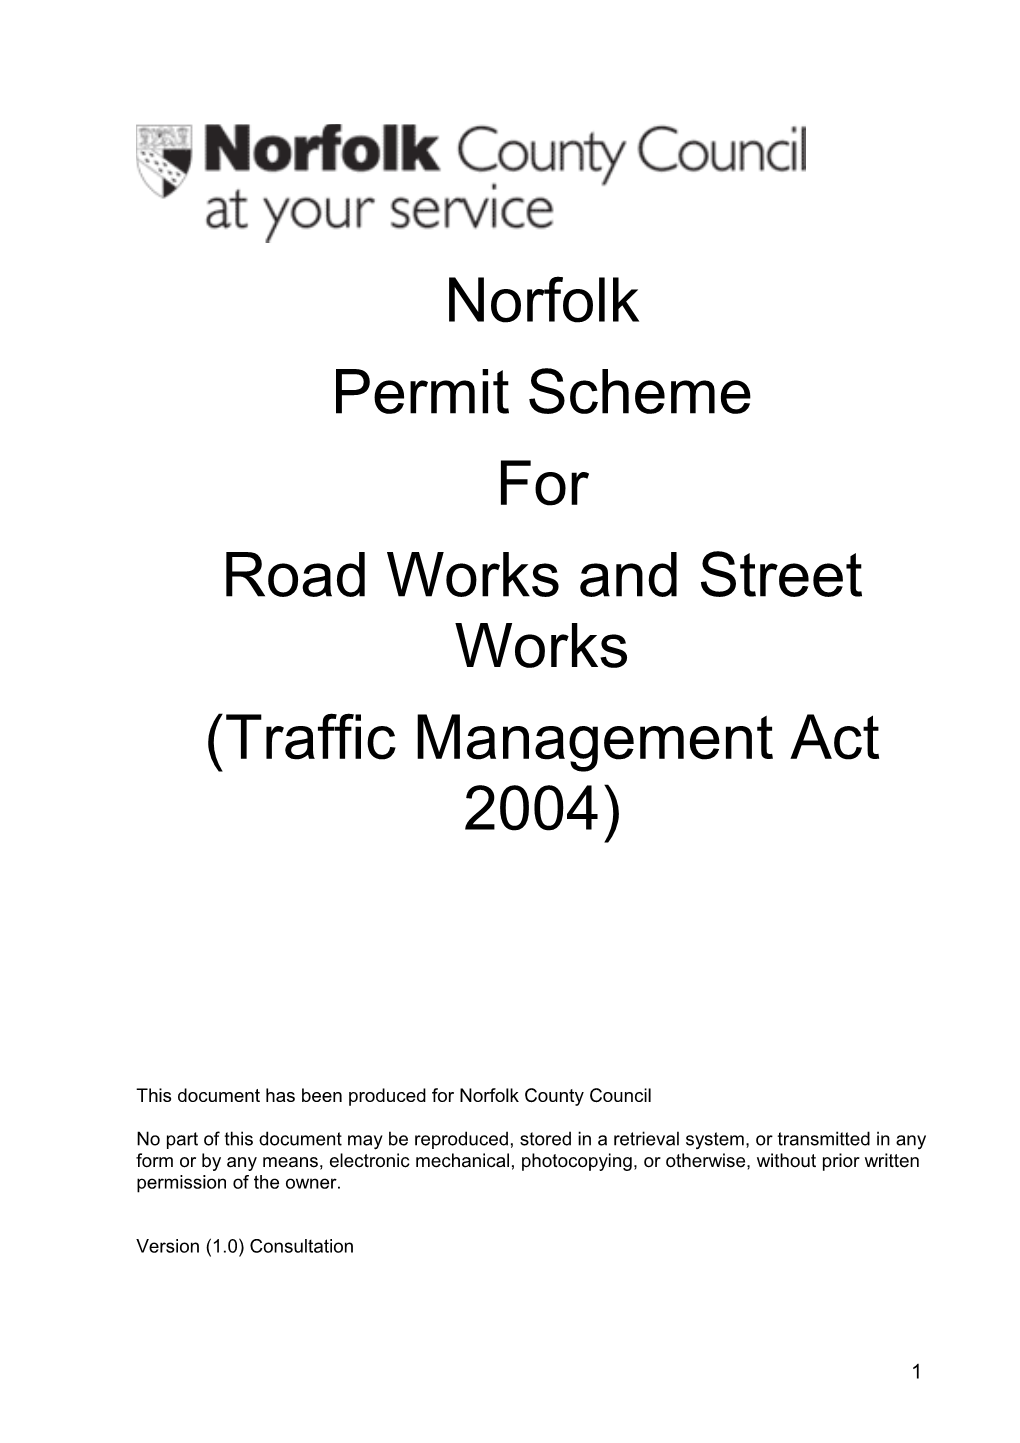 A Best Practice Guide Will Beco-Produced Bynorfolk County Council, Utilityprovidersand